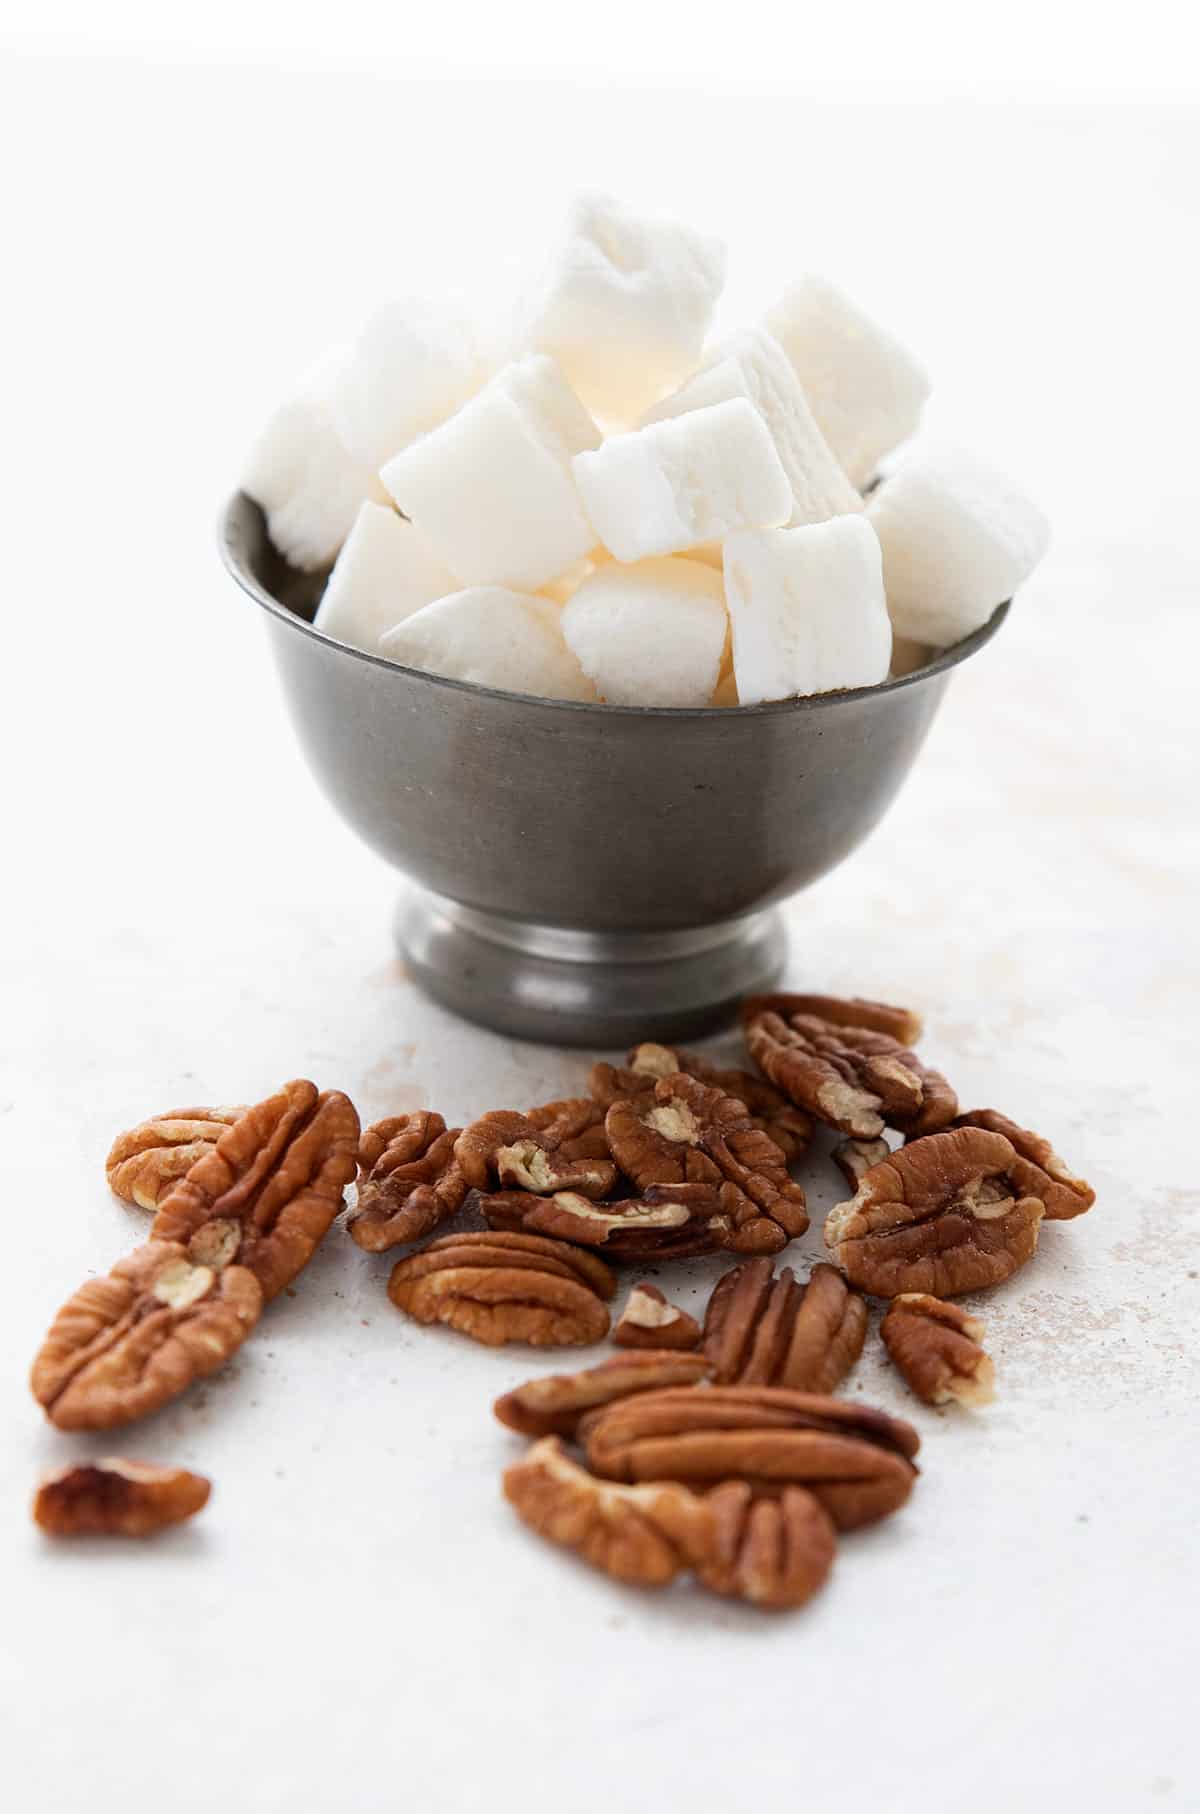 Keto marshmallows in a bowl, with pecans strewn around in front.